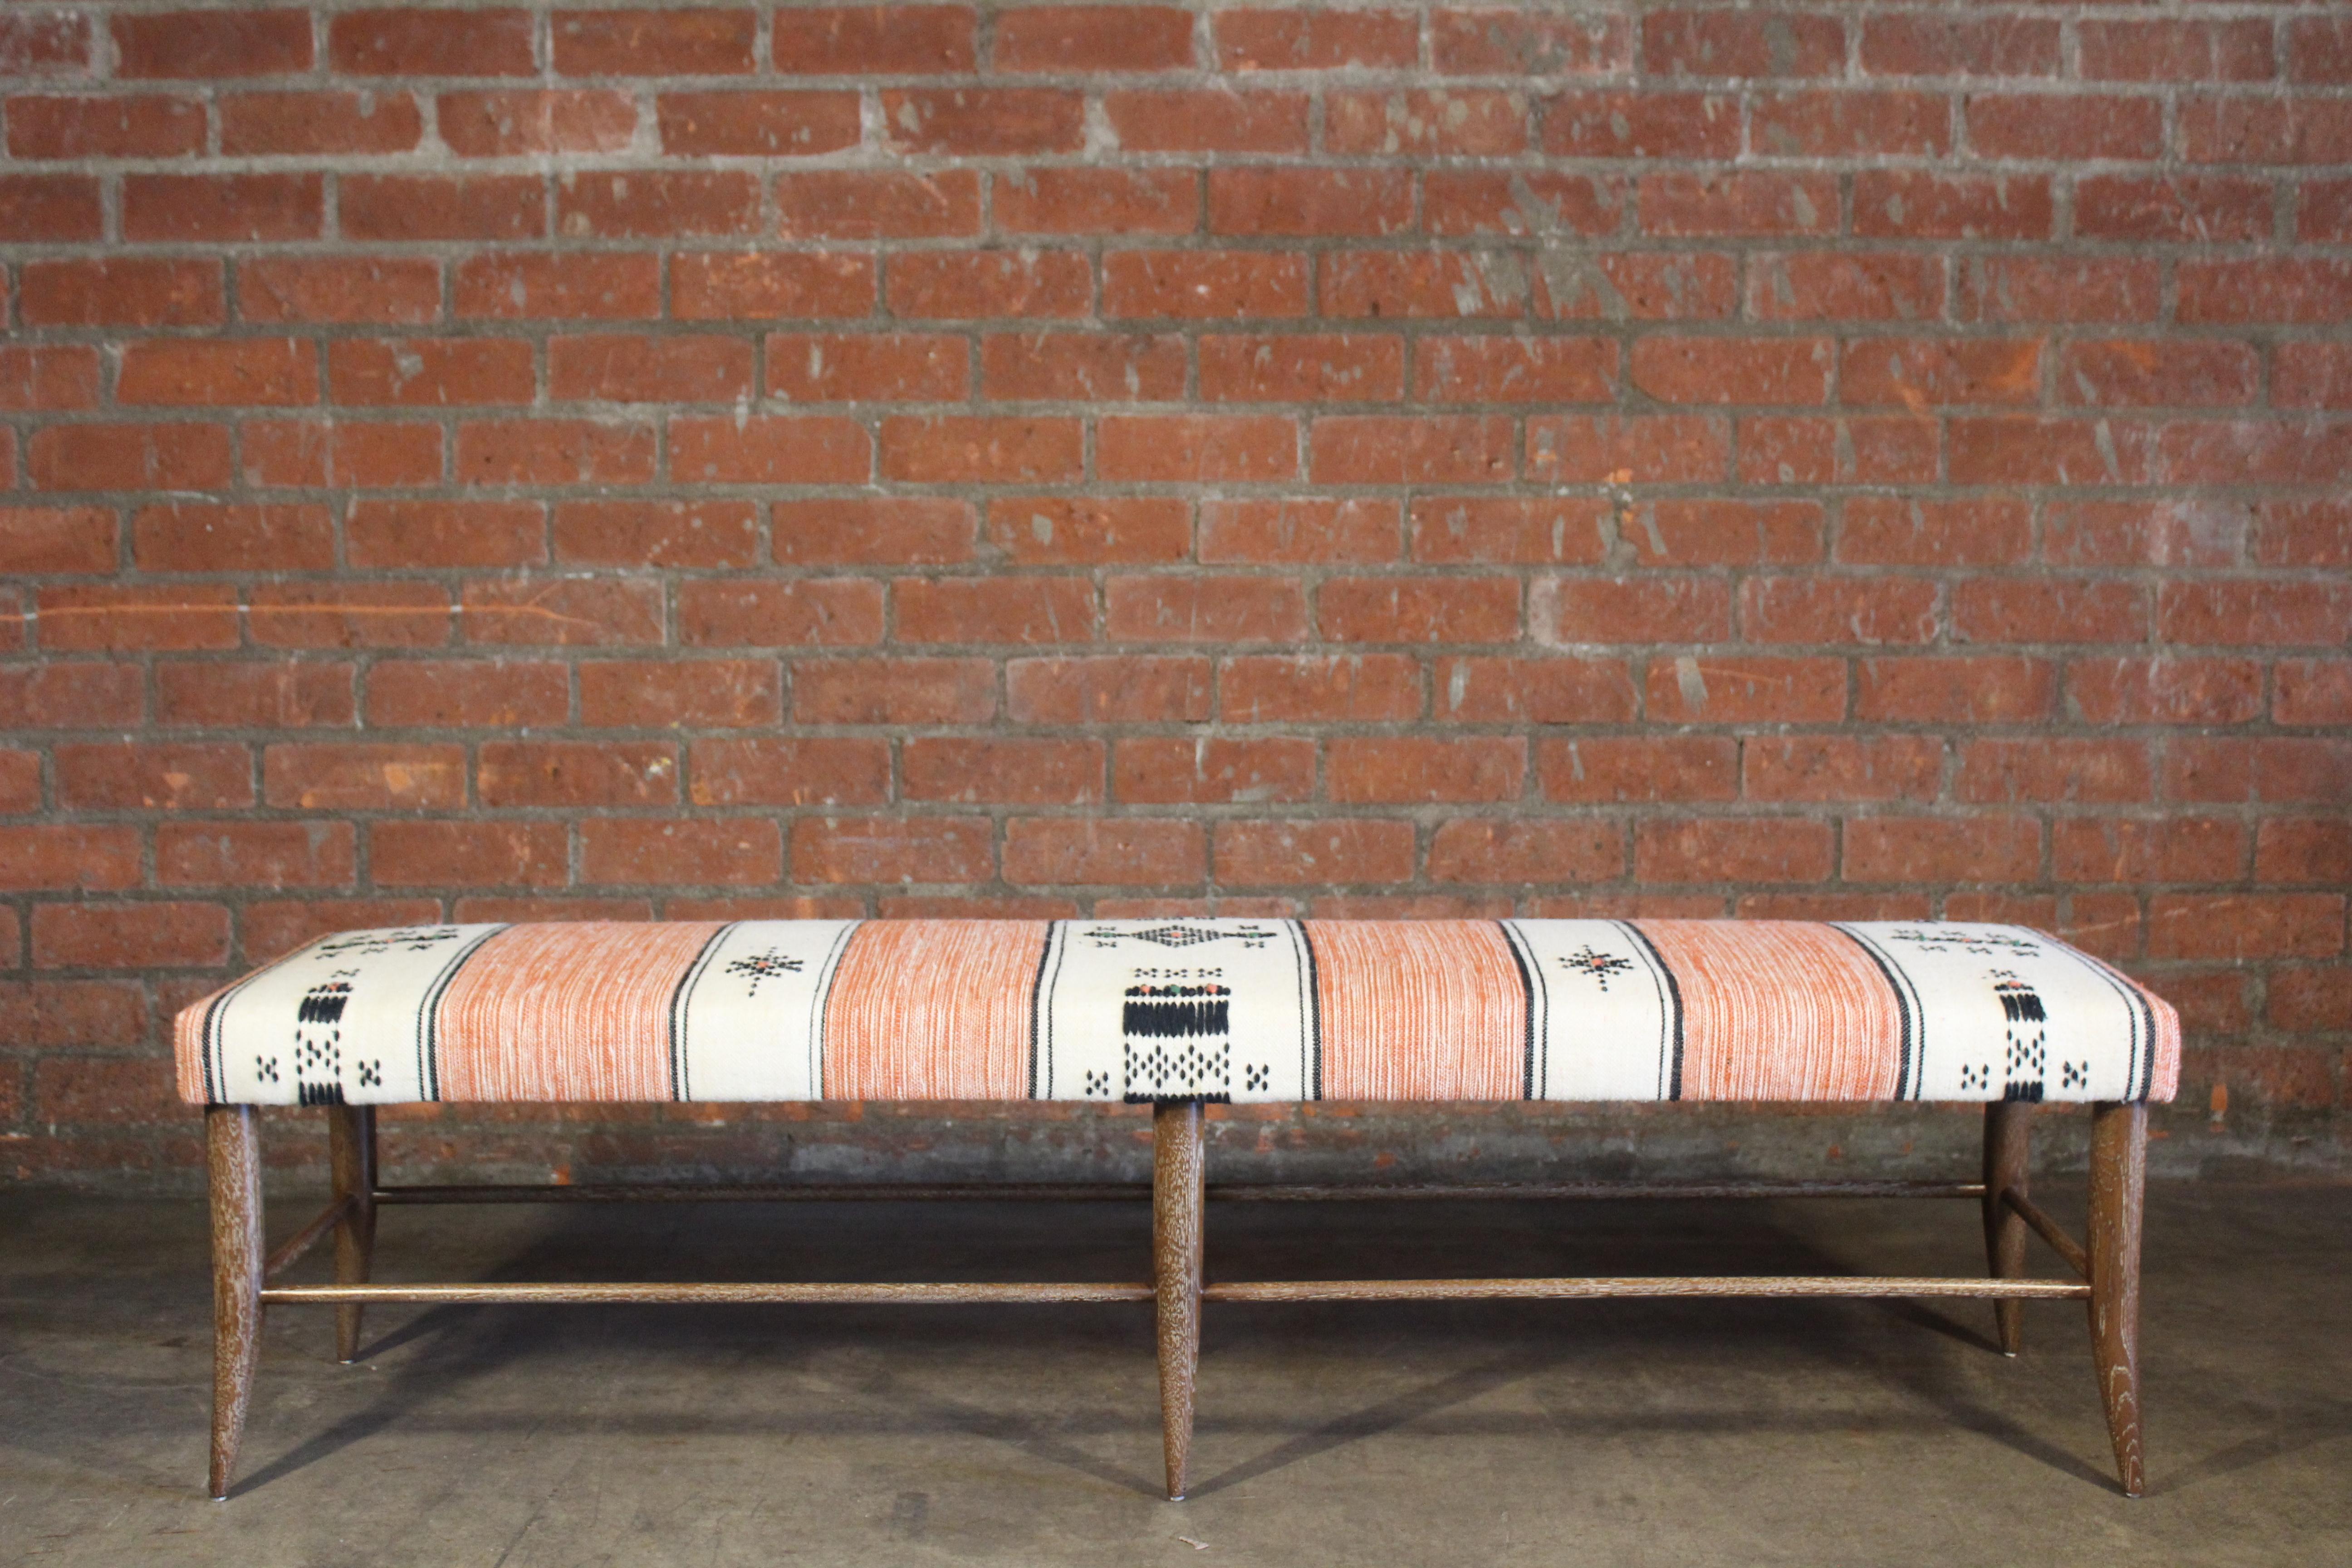 A solid oak handcrafted bench in dark cerused finish- handmade here in Los Angeles. Upholstered in a vintage orange and off-white Moroccan wool textile from the 1970s. In overall excellent condition.